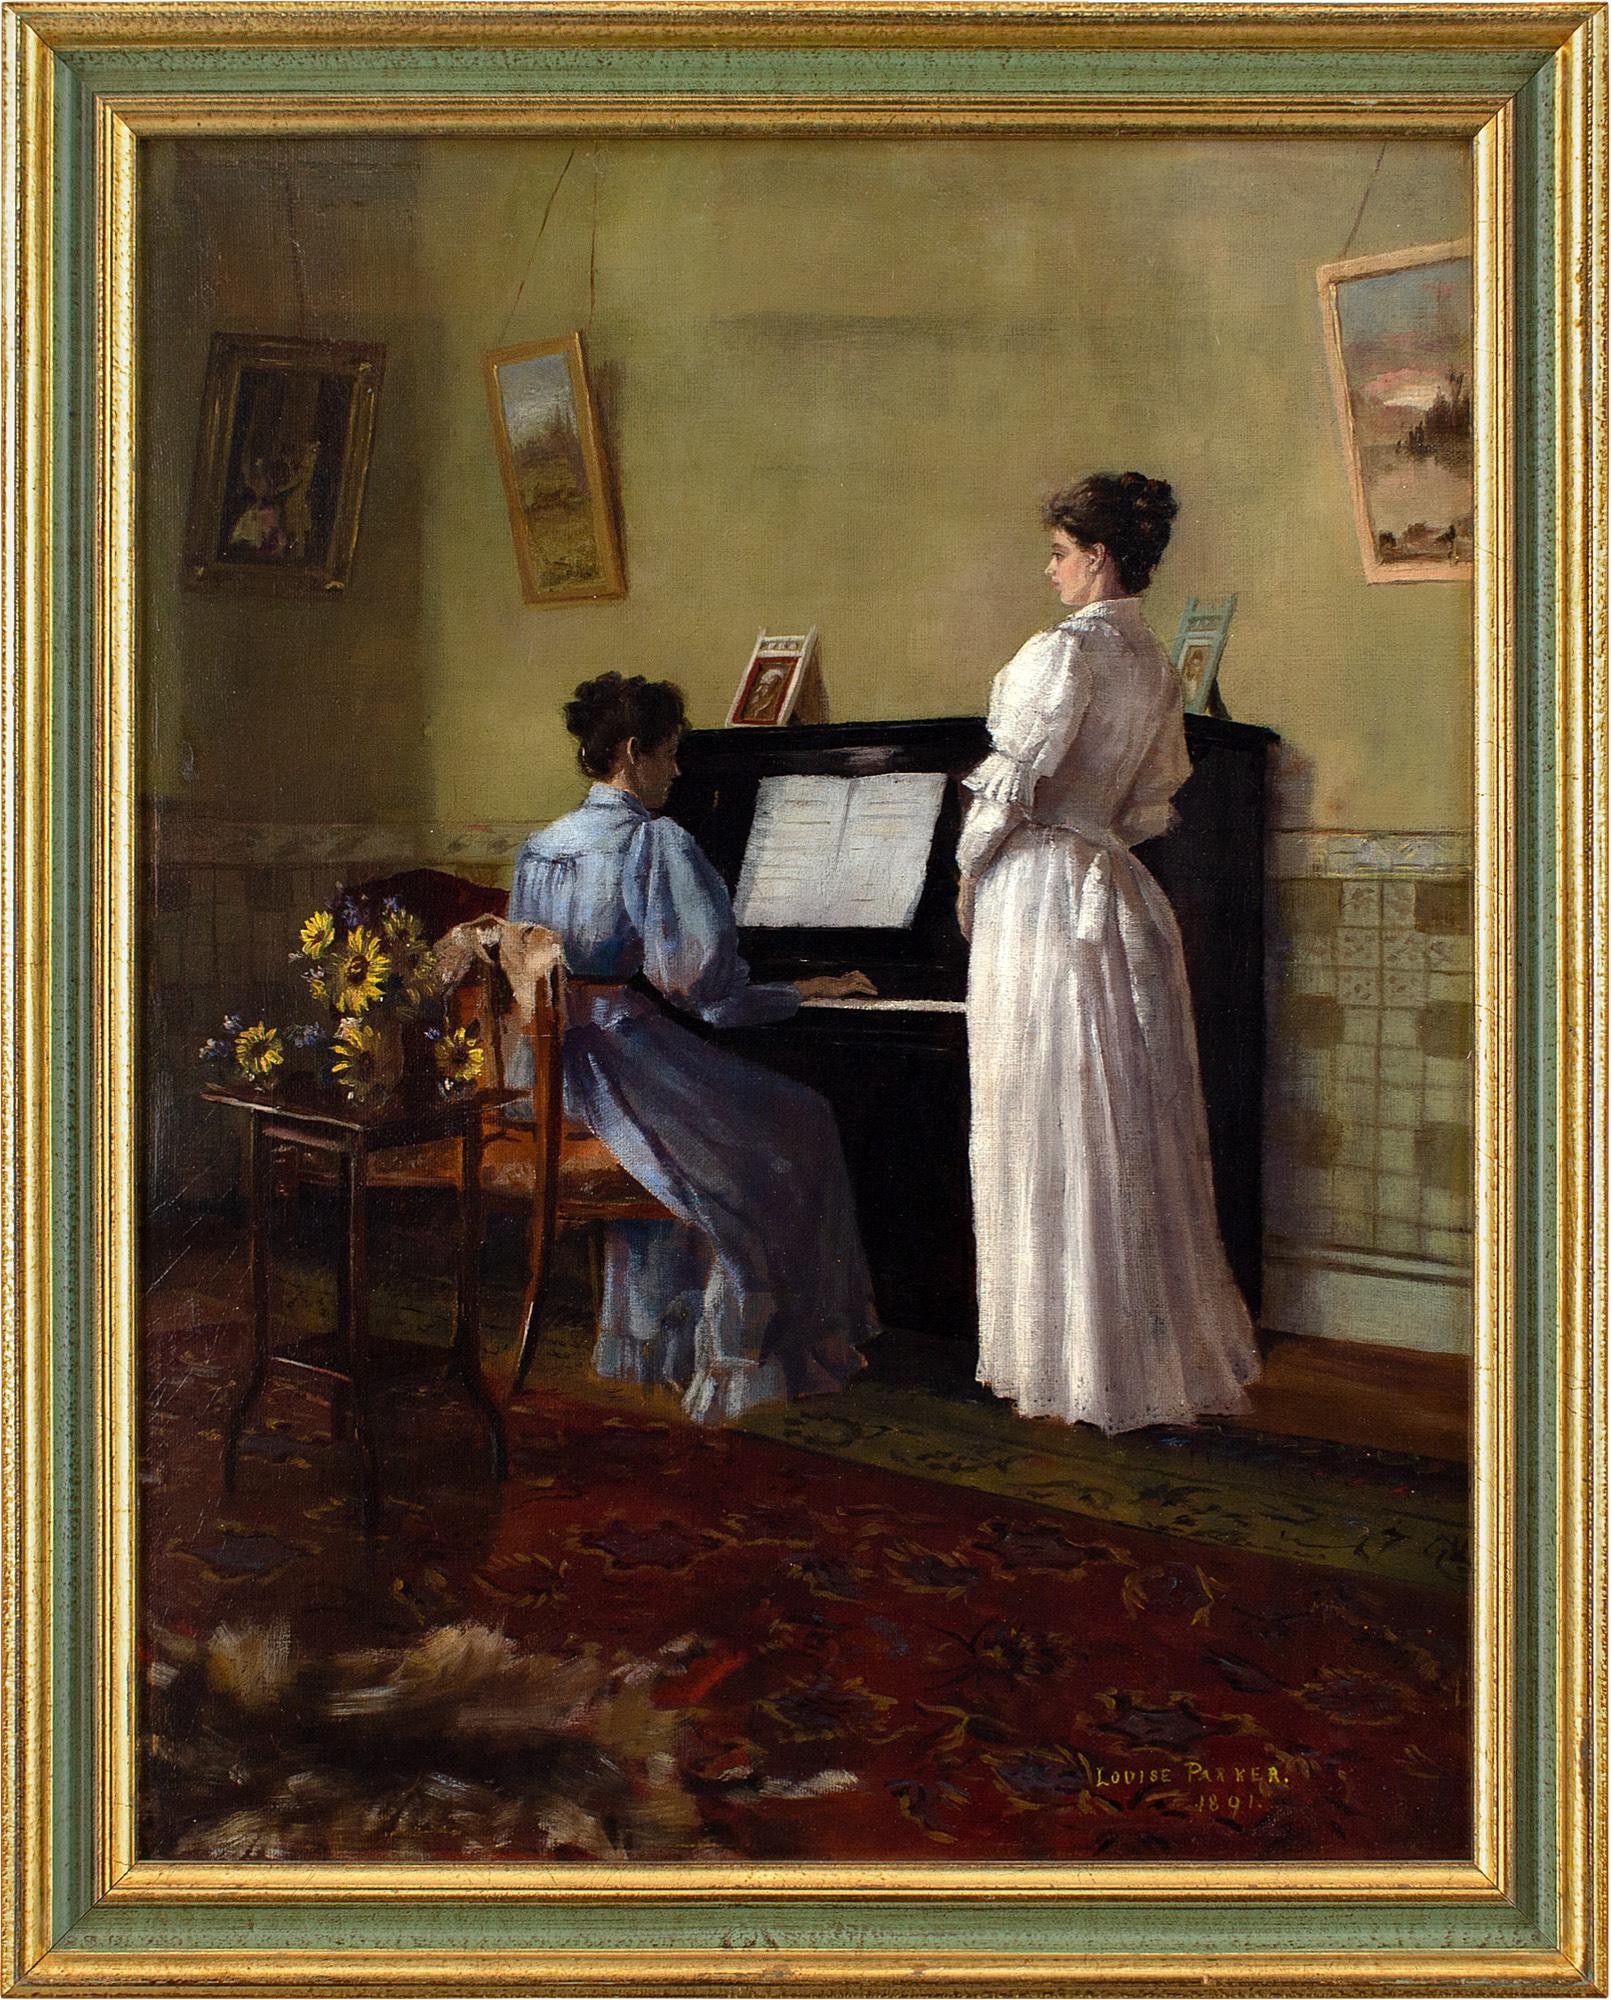 This late 19th-century oil painting by British artist Louise Parker (b. 1872) depicts a young lady singing while another plays the piano. It’s probably the artist’s sisters.

(Mary) Louise Parker was predominantly known for idyllic domestic genre